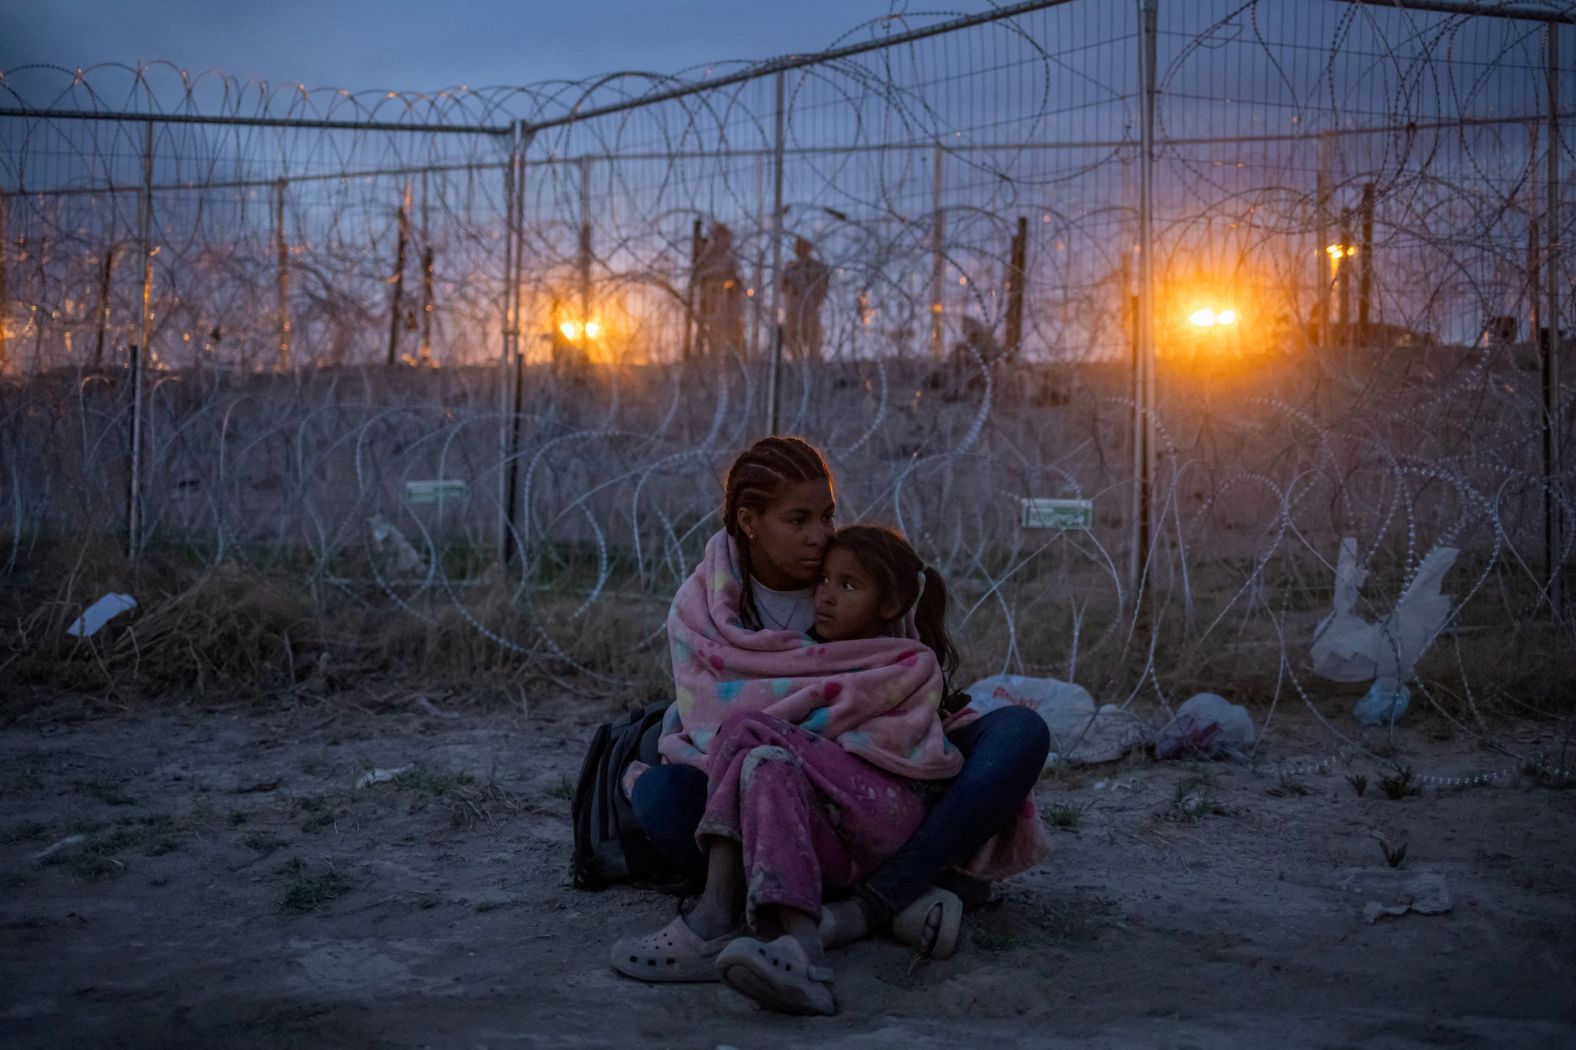 Michel, a Venezuelan migrant, holds her 7-year-old daughter Aranza at the US-Mexico border near El Paso, Texas, on Wednesday, April 24.